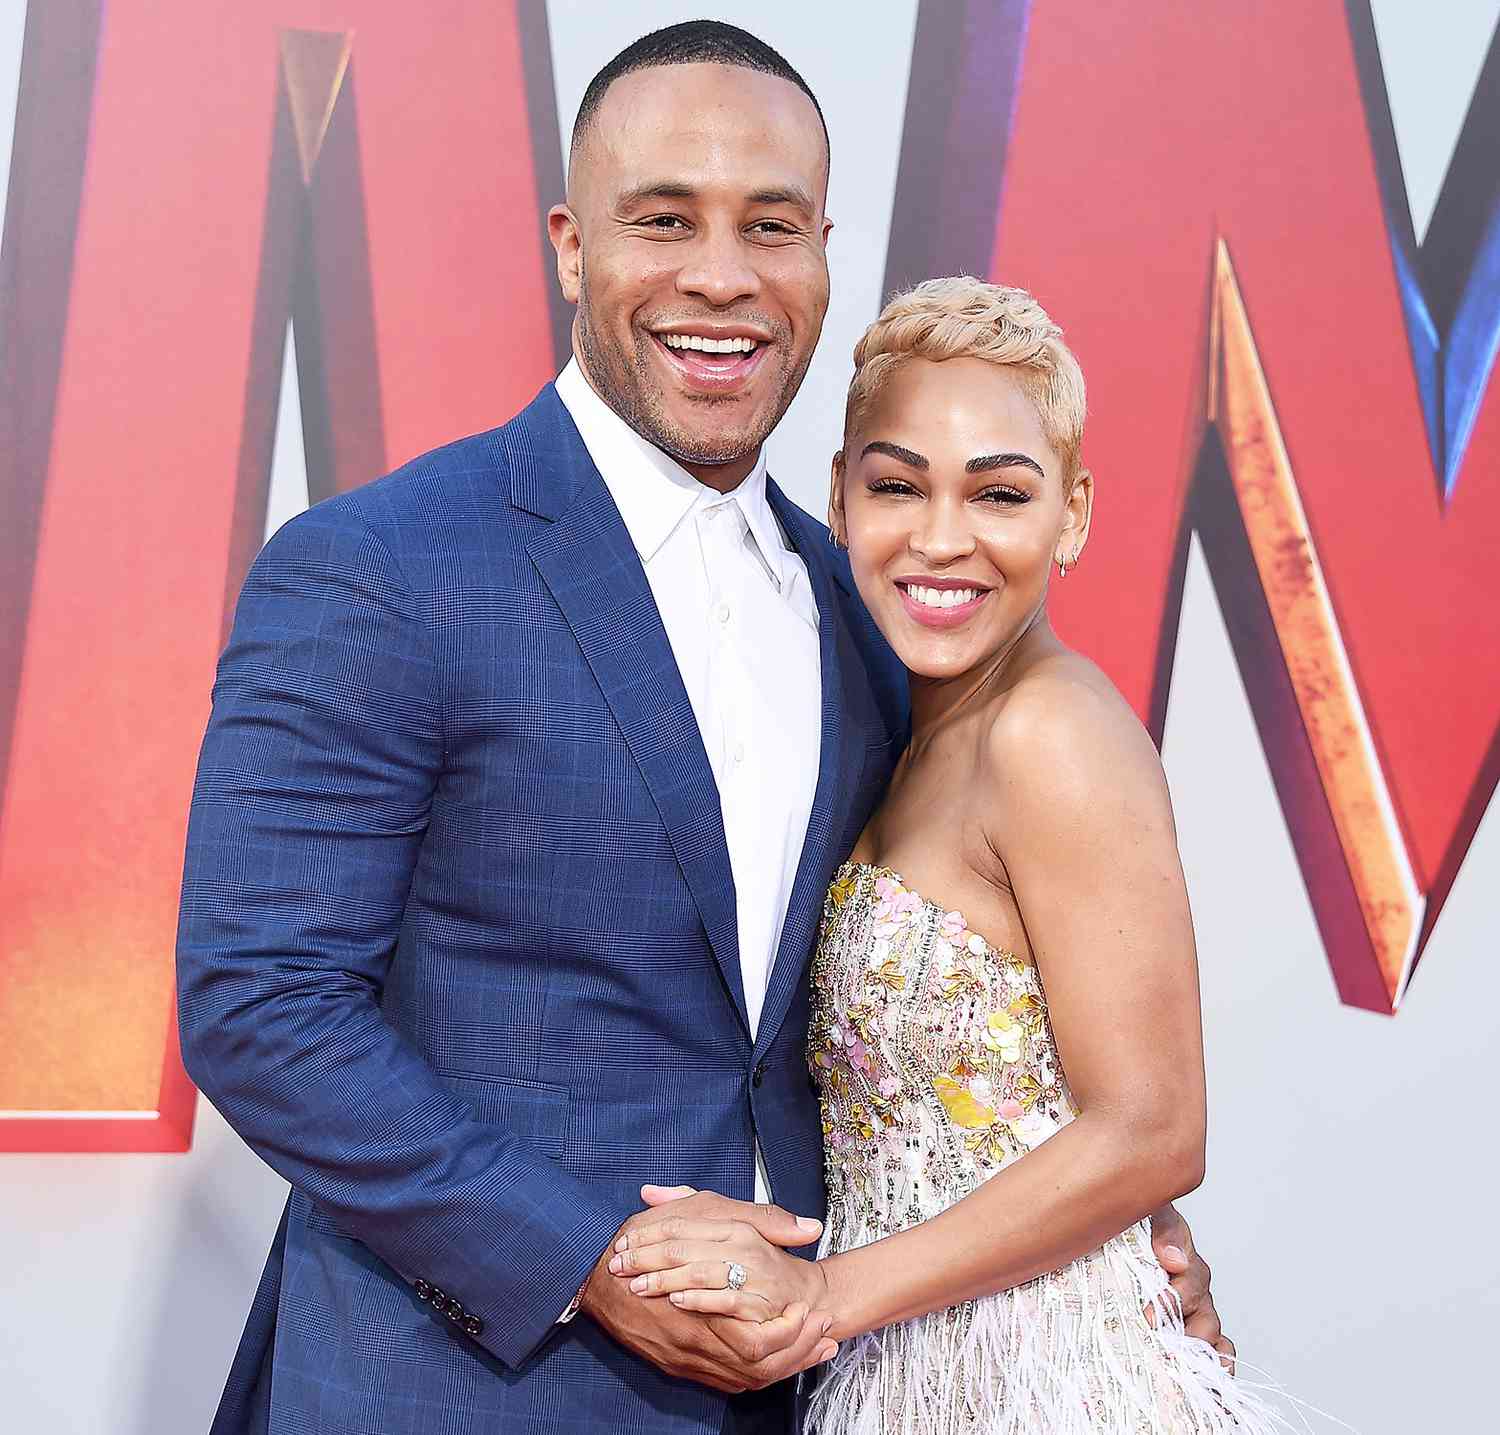 Meagan Good and DeVon Franklin attend Warner Bros. Pictures And New Line Cinema's World Premiere Of "SHAZAM!" at TCL Chinese Theatre on March 28, 2019 in Hollywood, California.